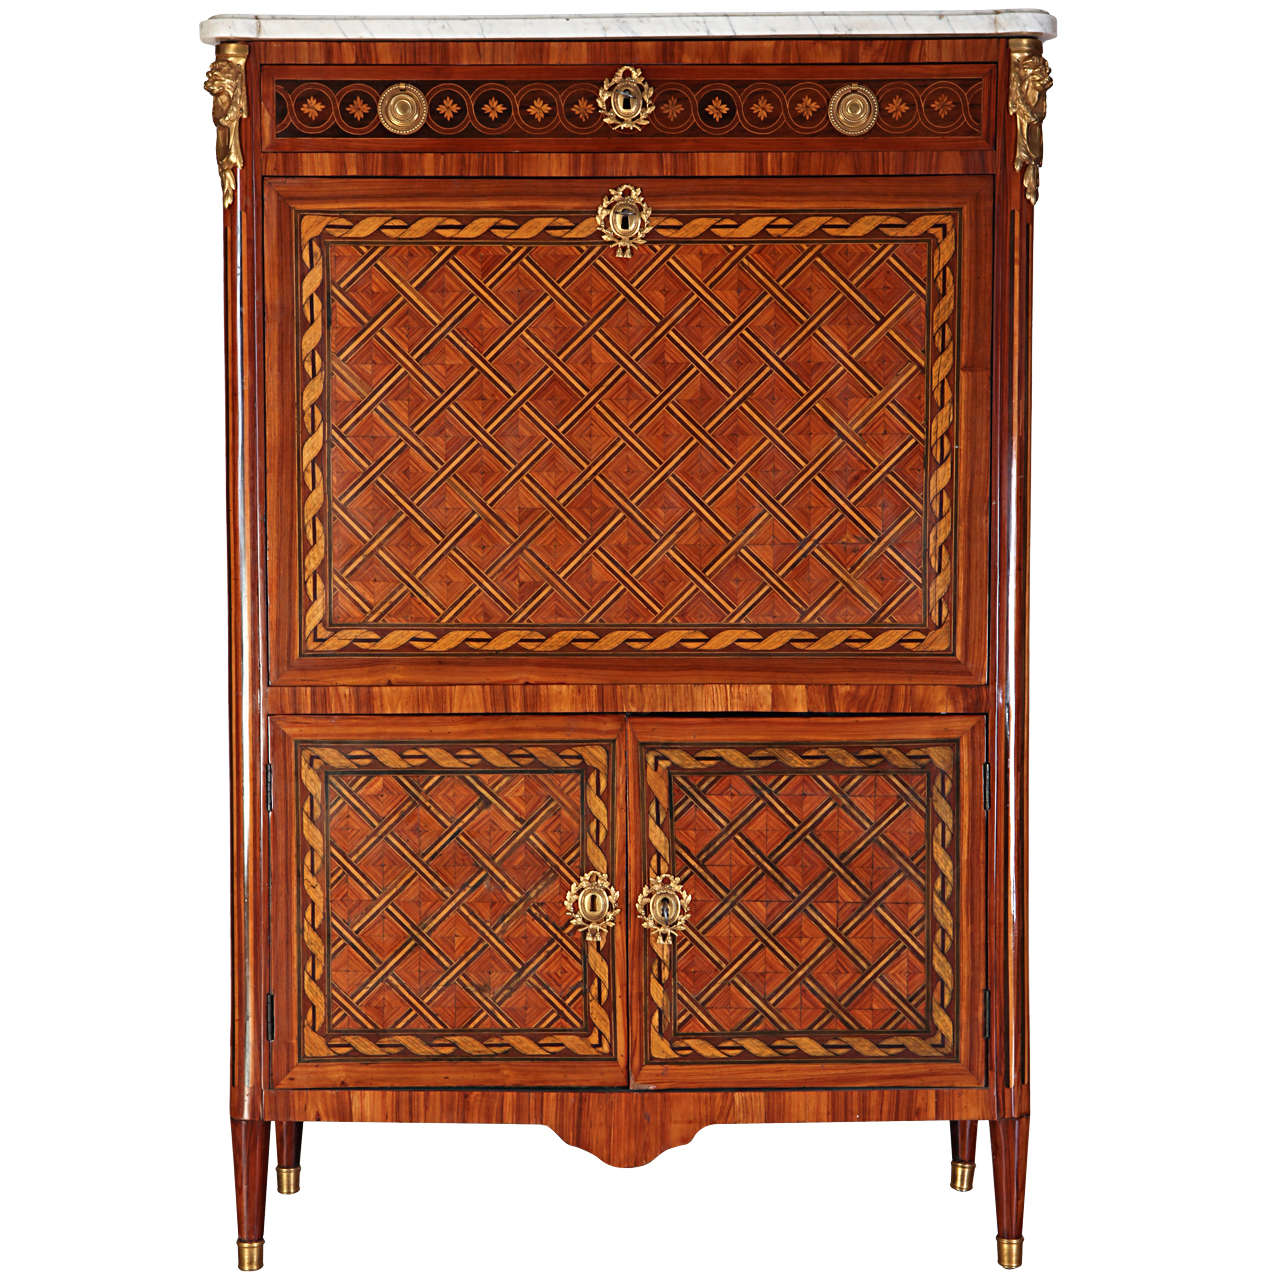 Fine French Ormolu-Mounted Marqueterie Secretaire Abattant